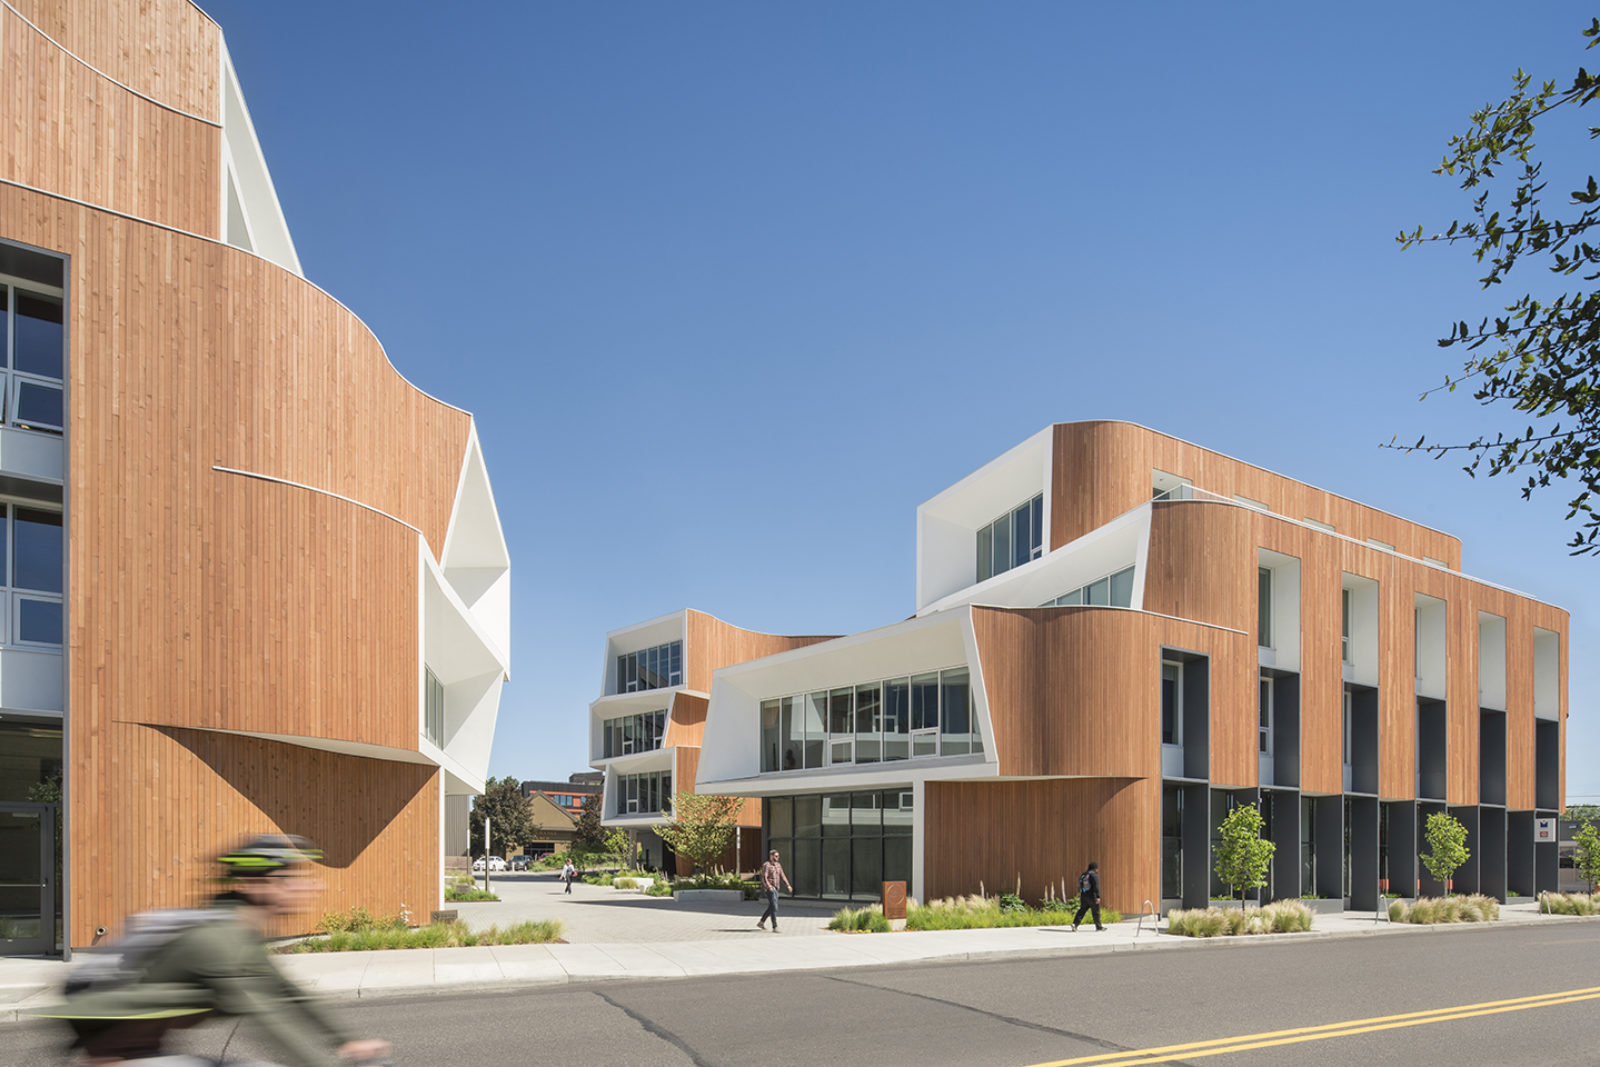 Holst Architecture Newest Project in Portland Contains Curvilinear Facade